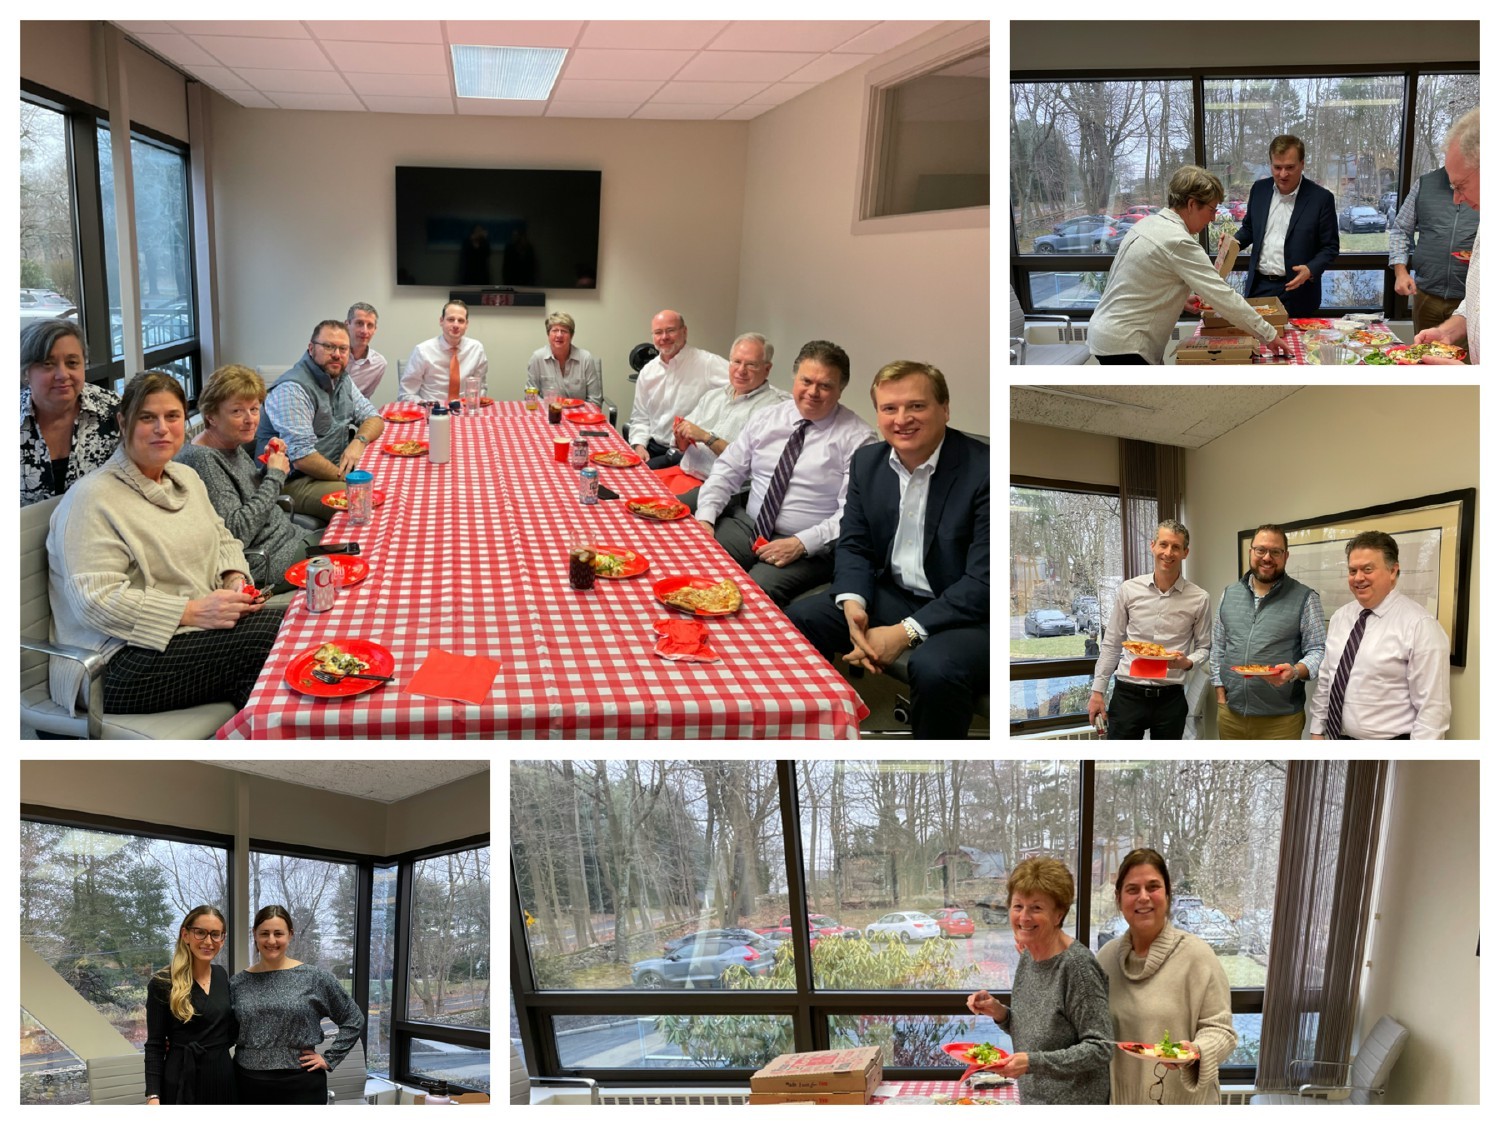 FLB Law hosts monthly firm lunches for attorneys and staff.